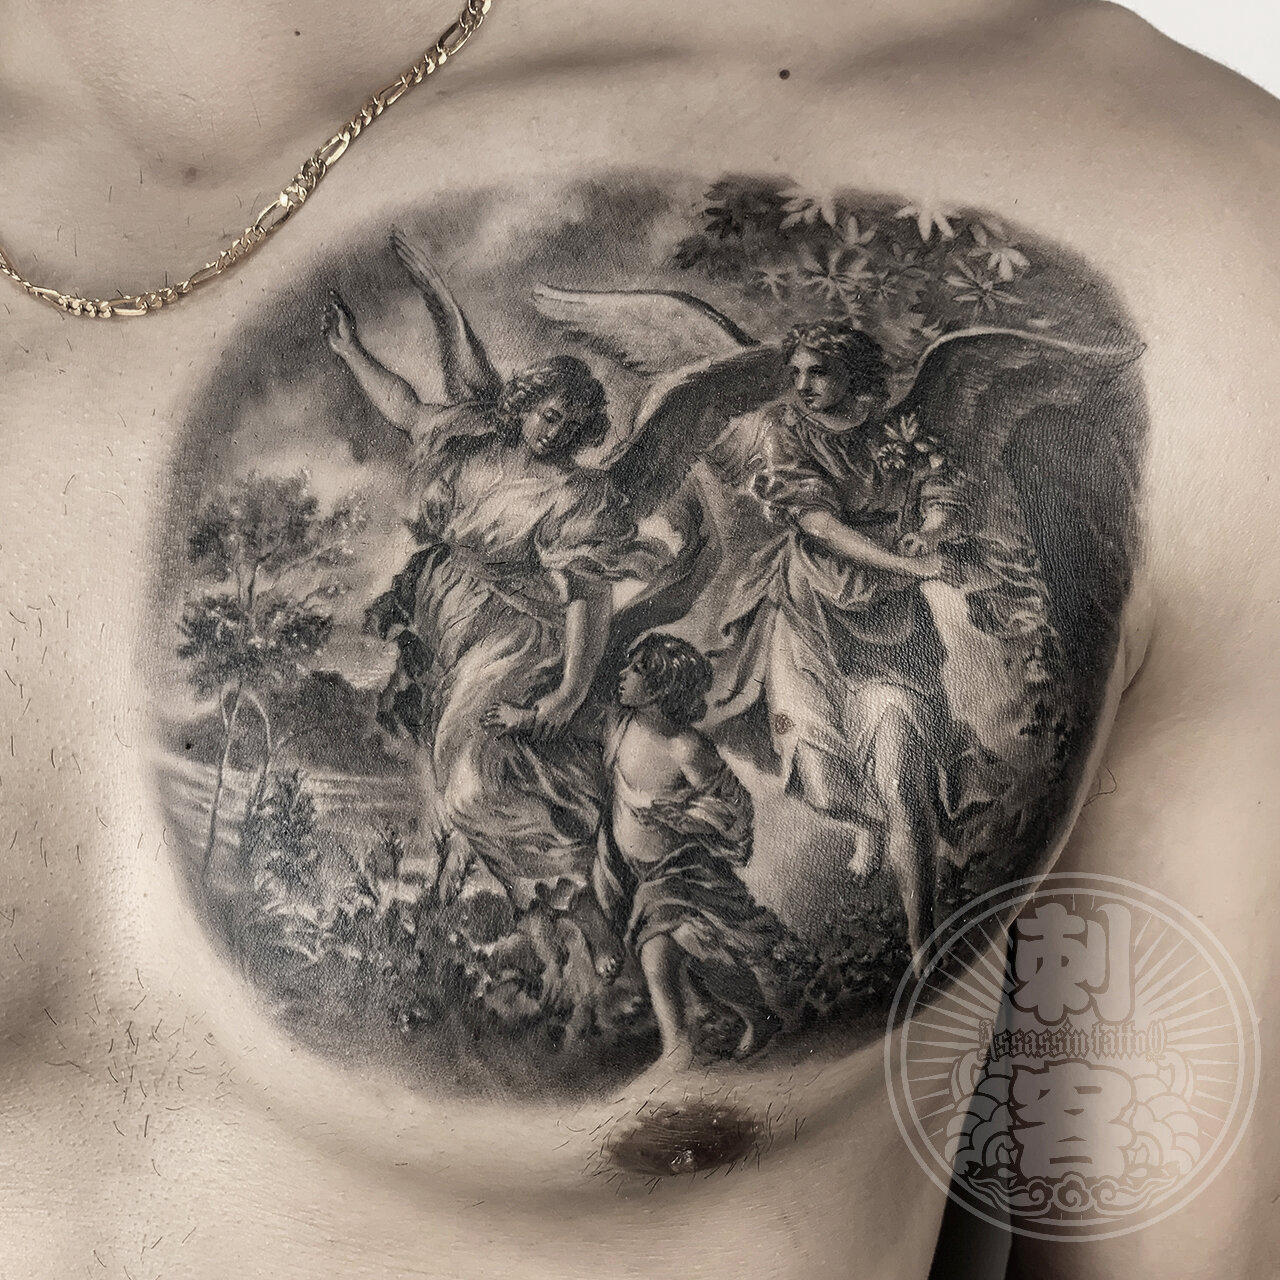 Skin fx tattoos - 😈Demon chest piece done by Tony 😈 If you want to get  dark theme custom tattoo, Tony is the man with the 30 years of experience  who does